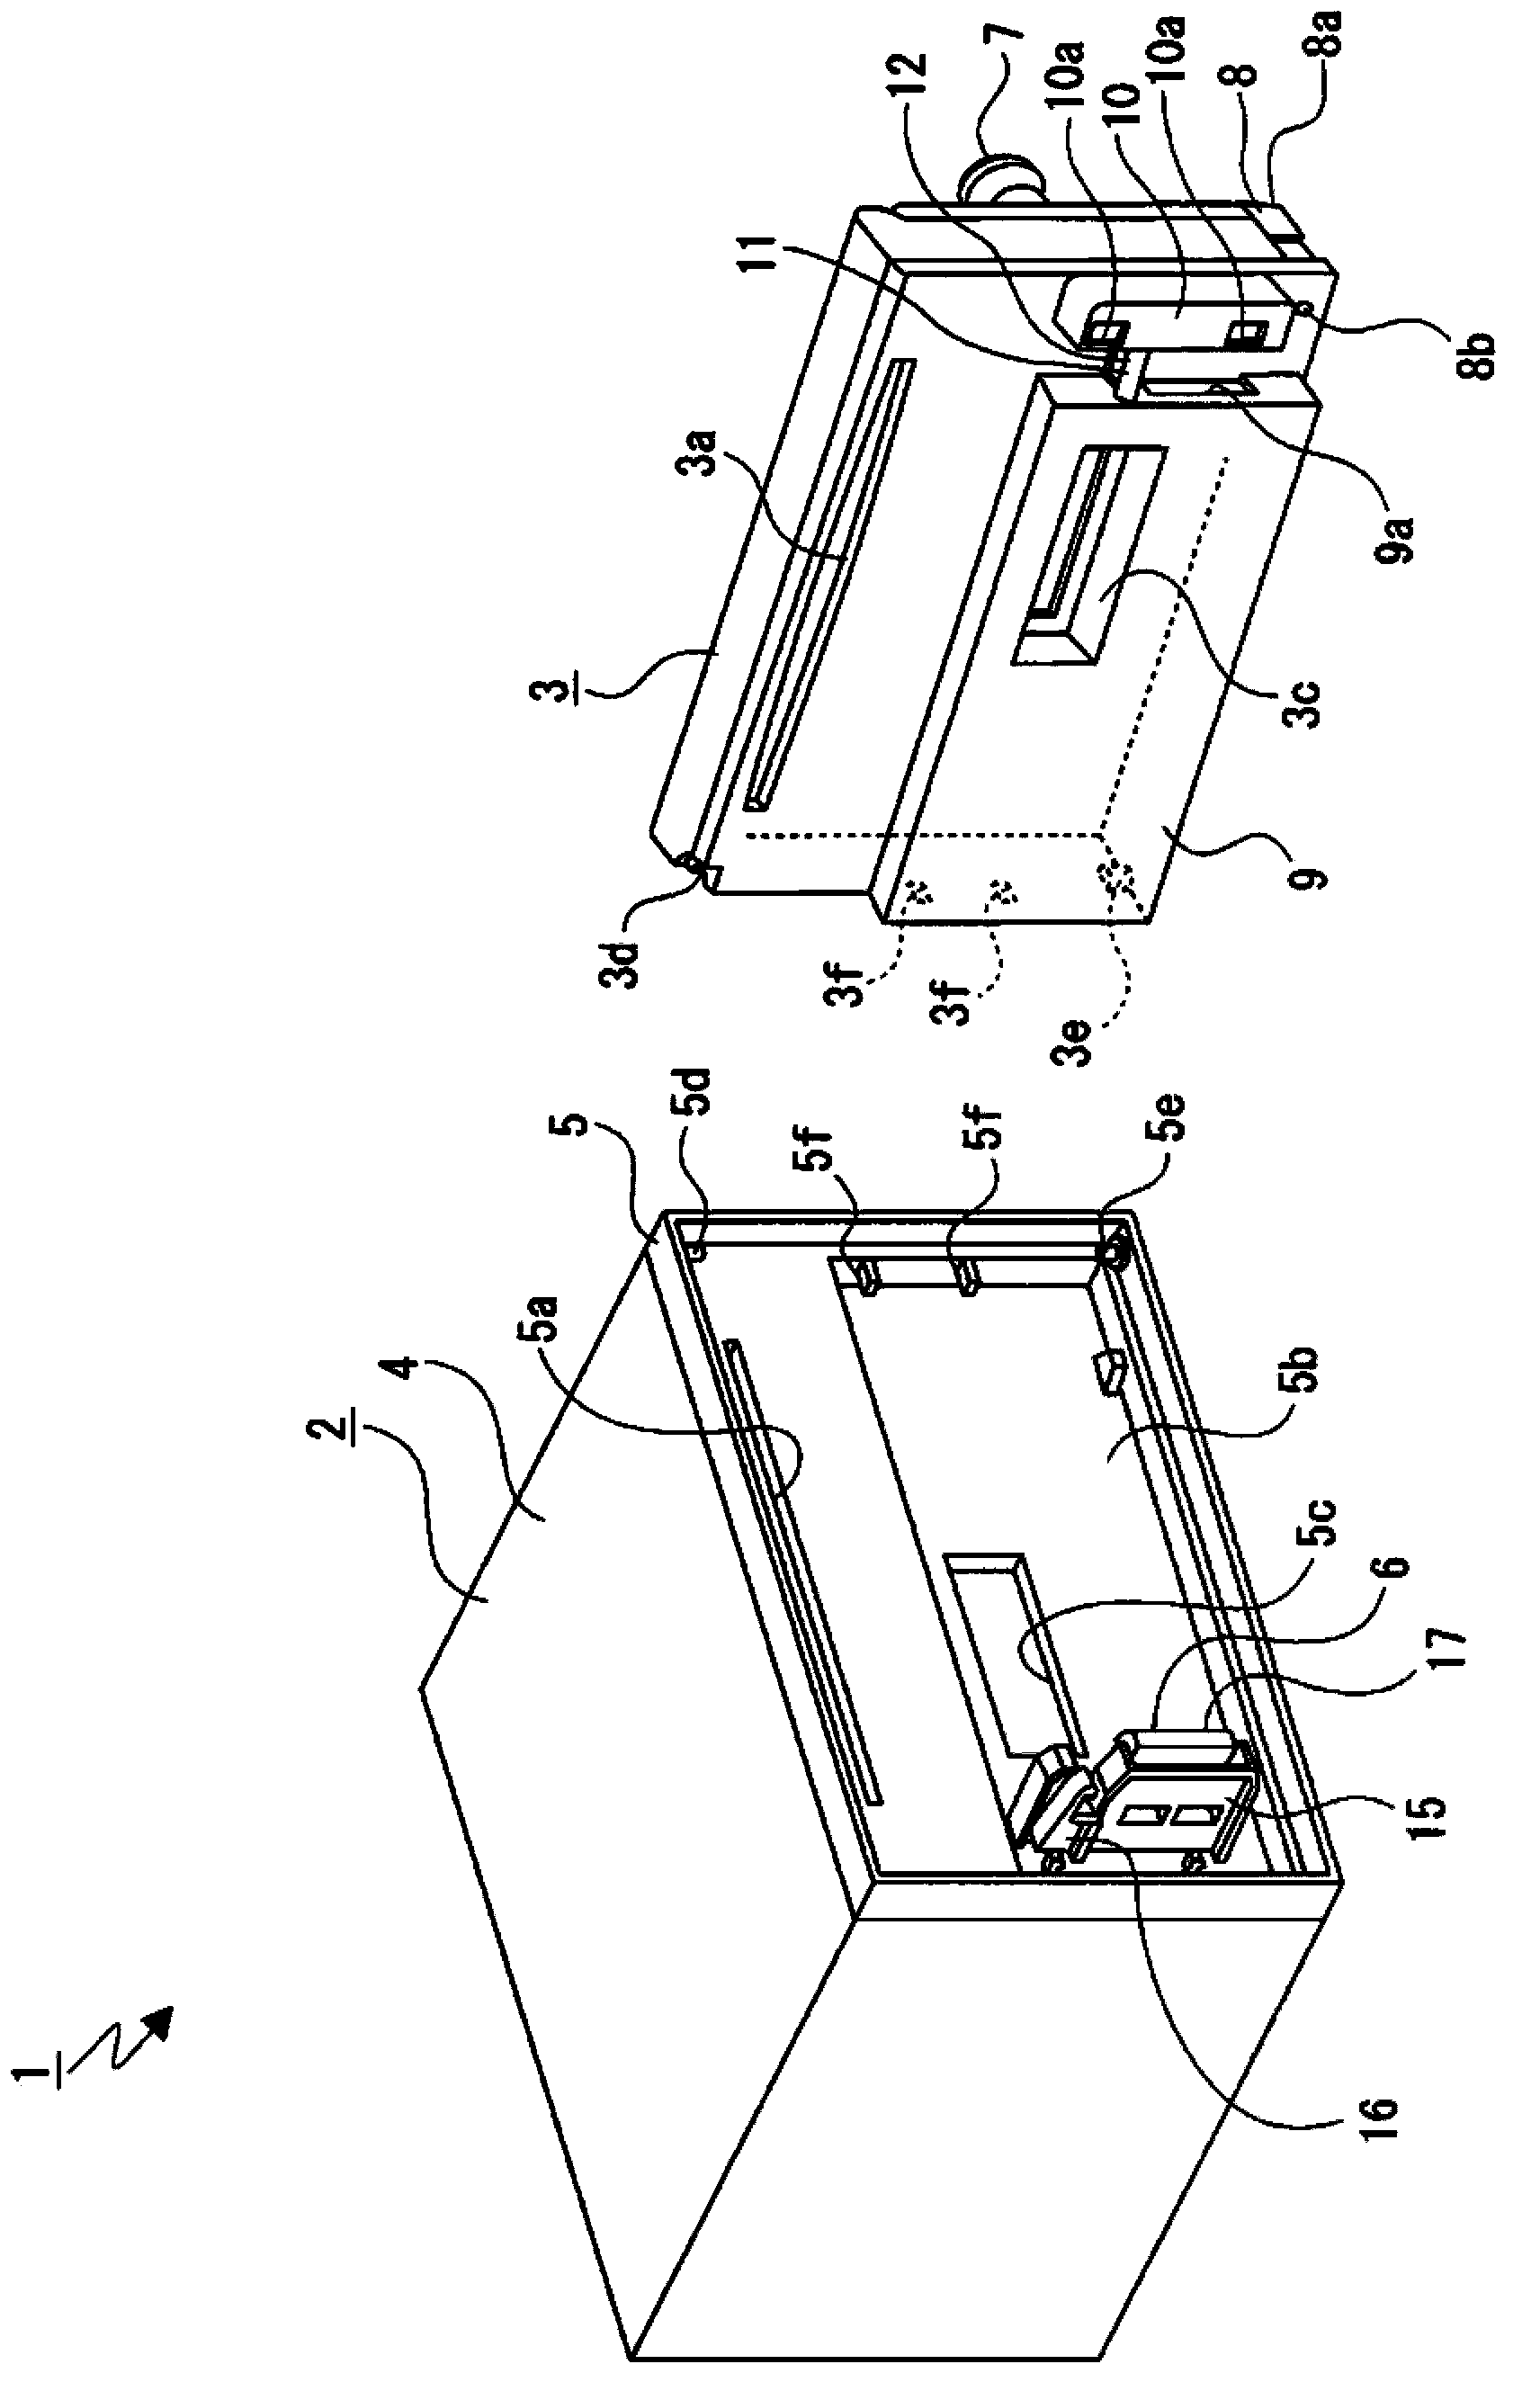 In-vehicle electronic apparatus